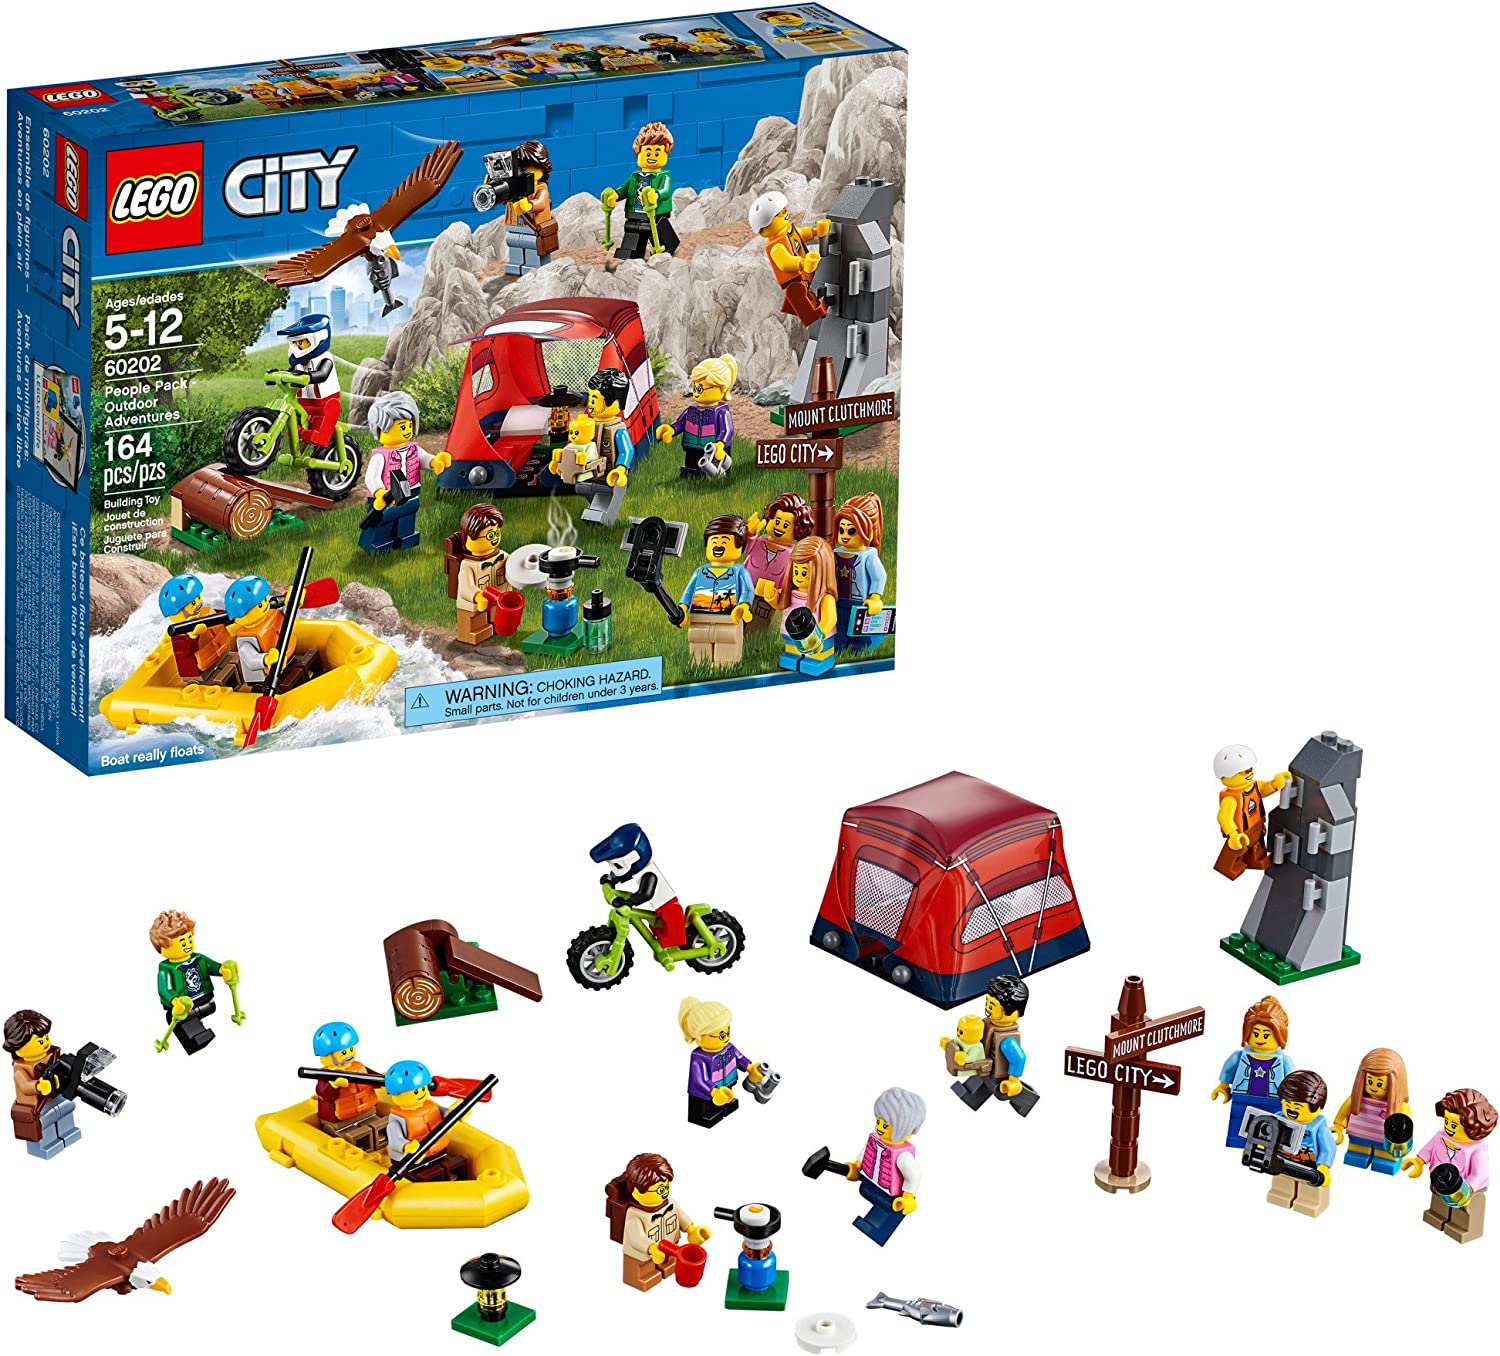 LEGO City People Pack Outdoors Adventures 60202 Building Kit (164 Pieces) Discontinued by Manufacturer)